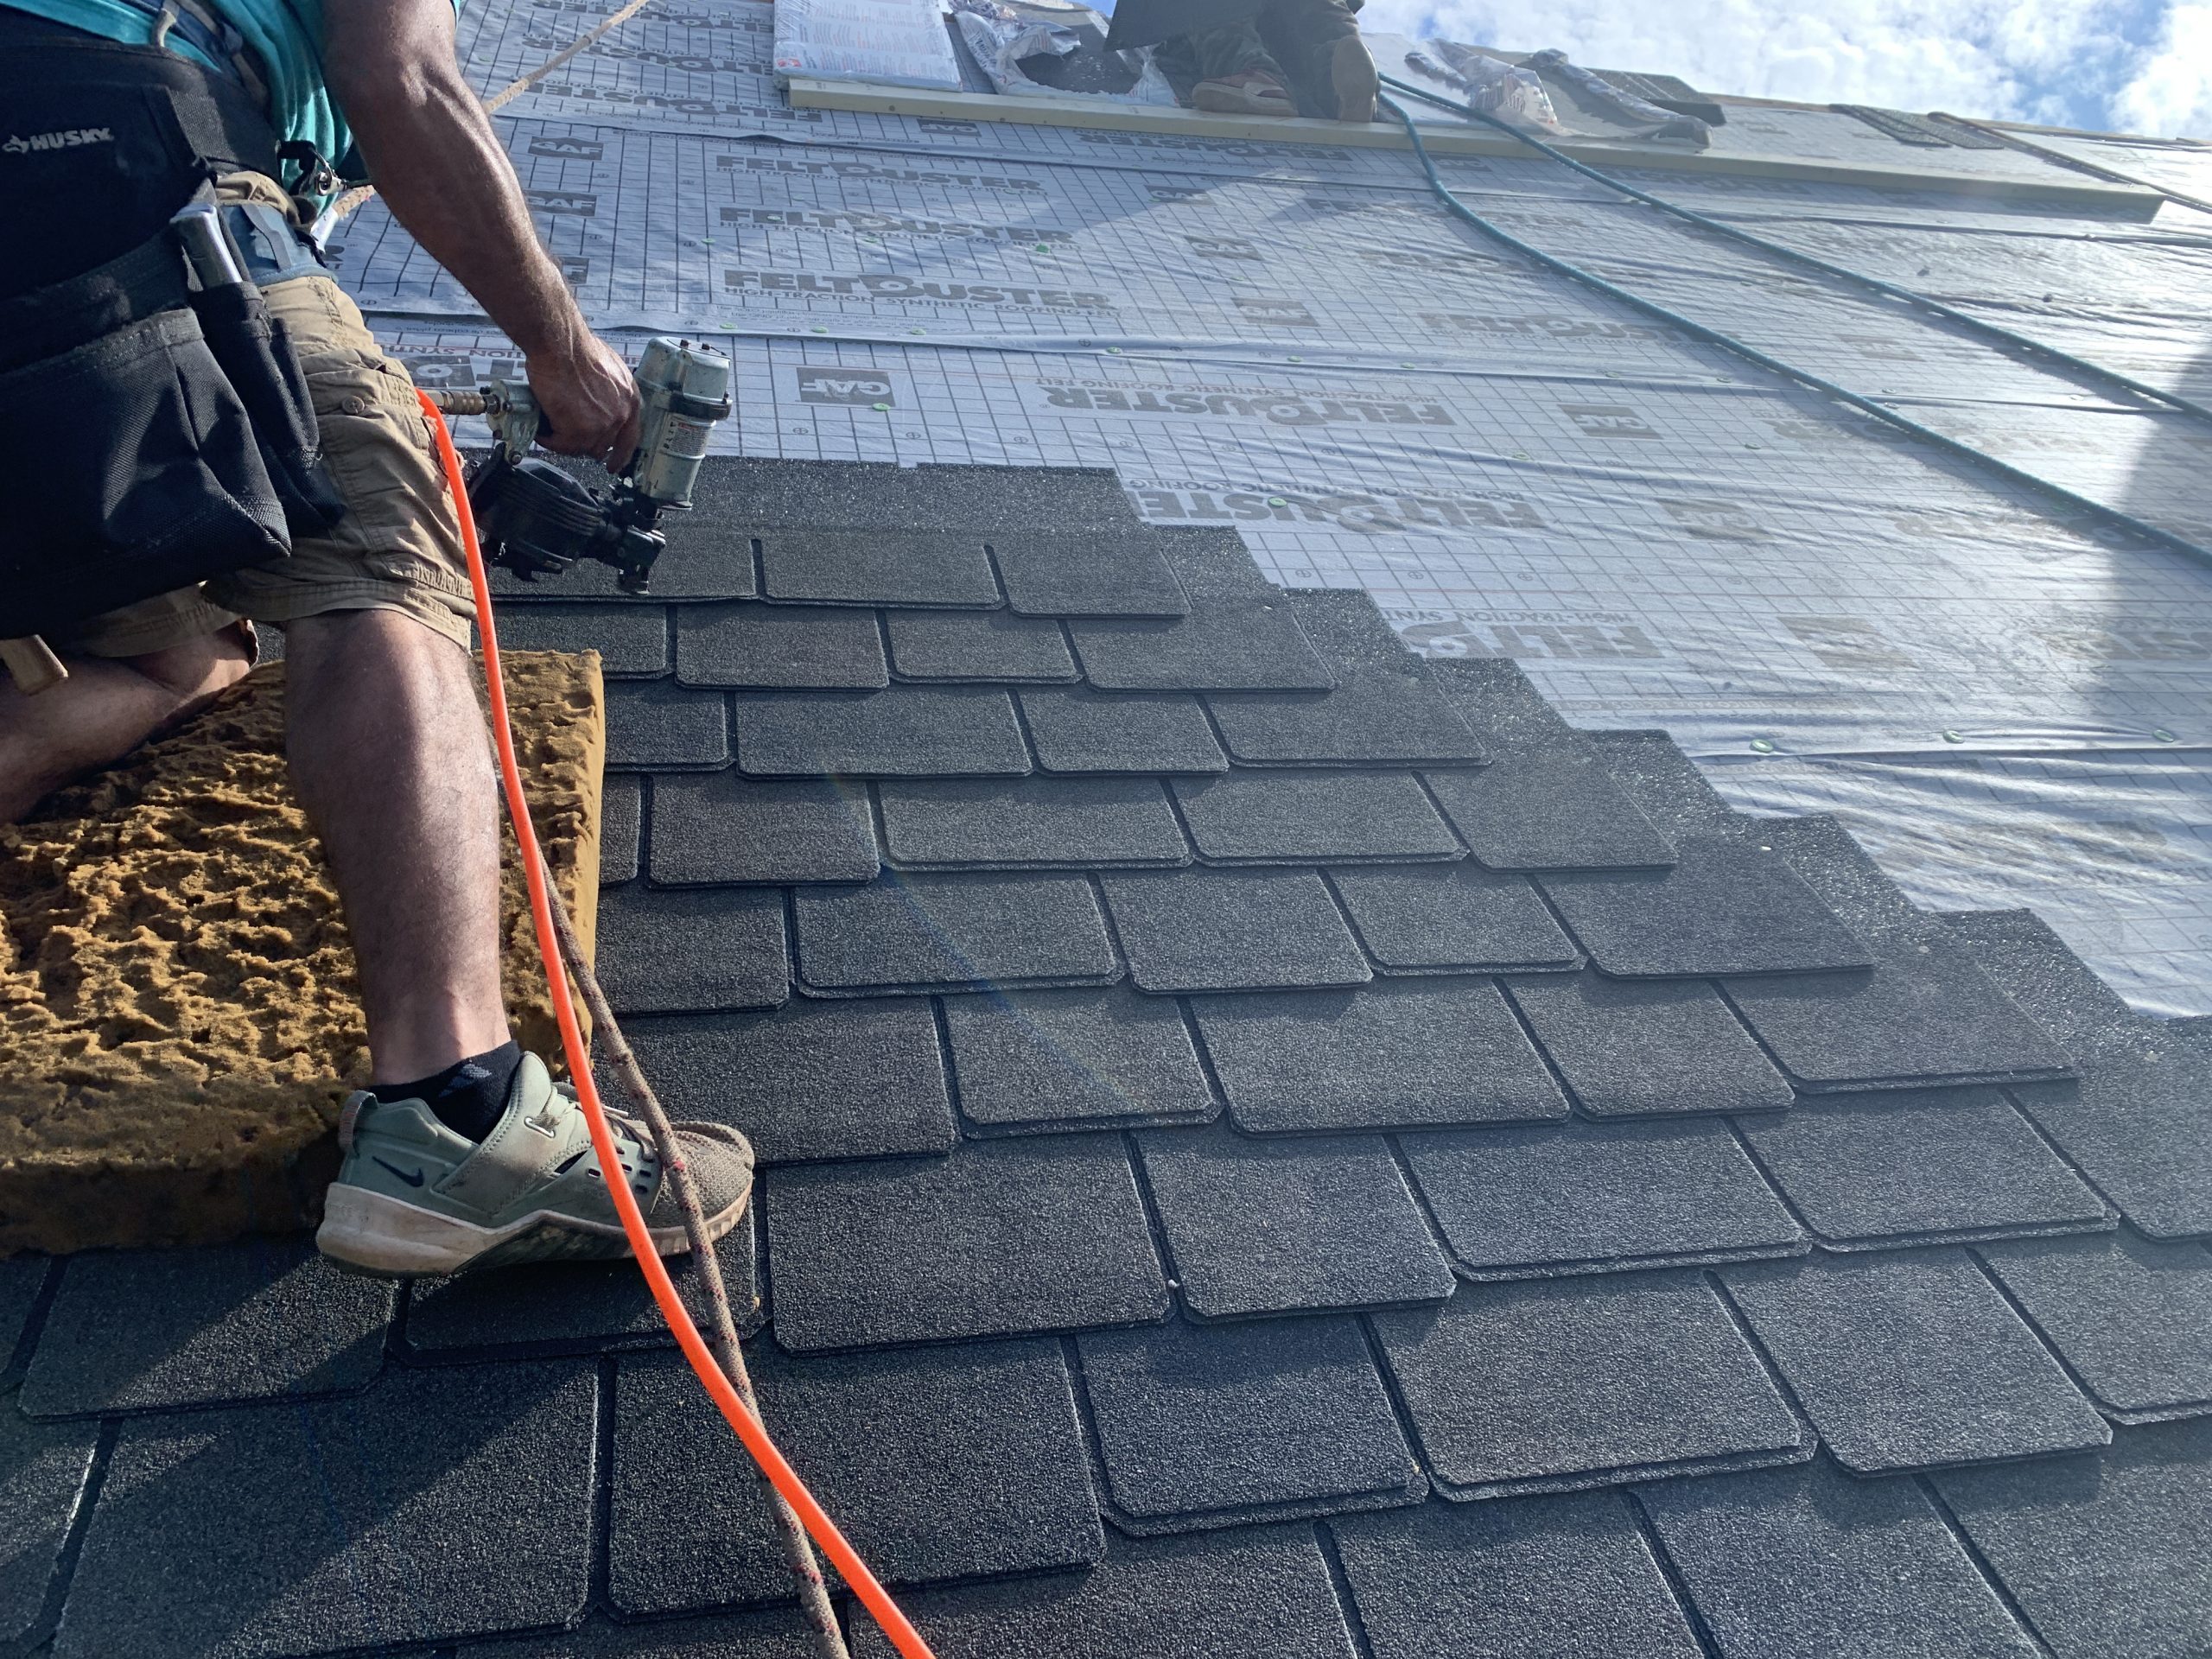 This is a view of shingles being installed. There is felt installed and shingles being nailed over the felt. 